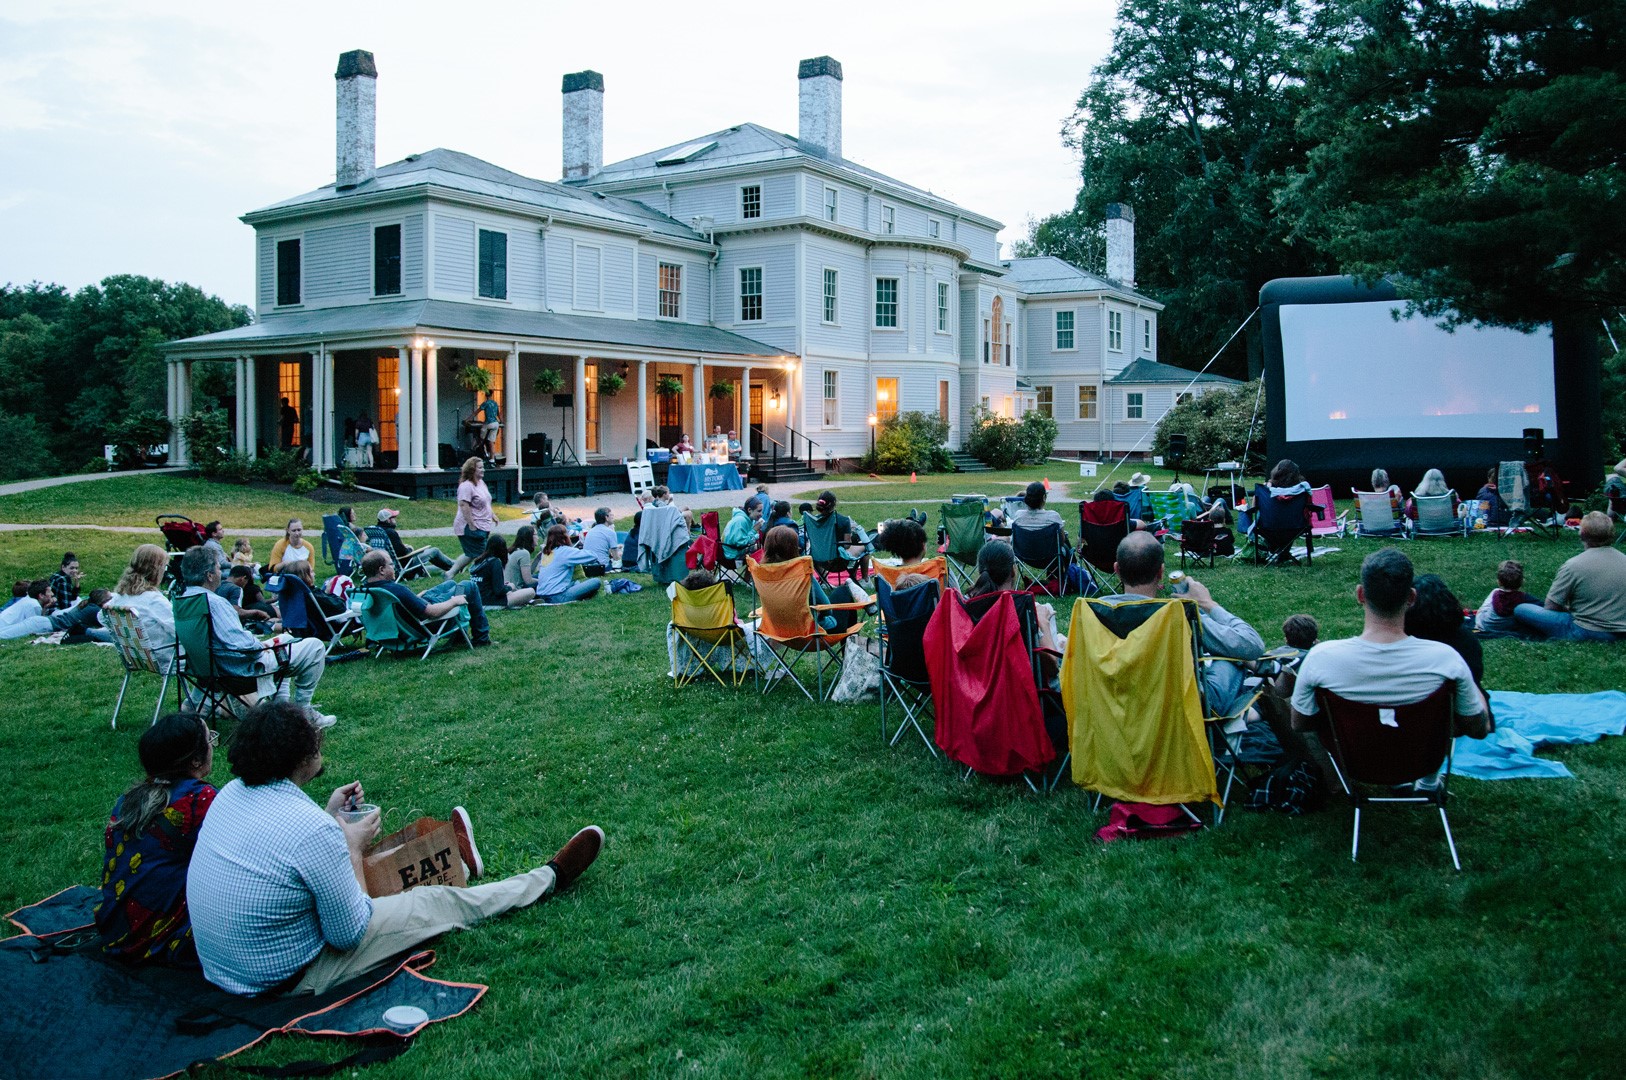 A large group of people sitting on lawn chairs and blankets on the rear lawn of the Lyman Estate, with an inflatable movie screen in front of them. It is early evening, and warm lights are visible through the windows of the mansion behind them.